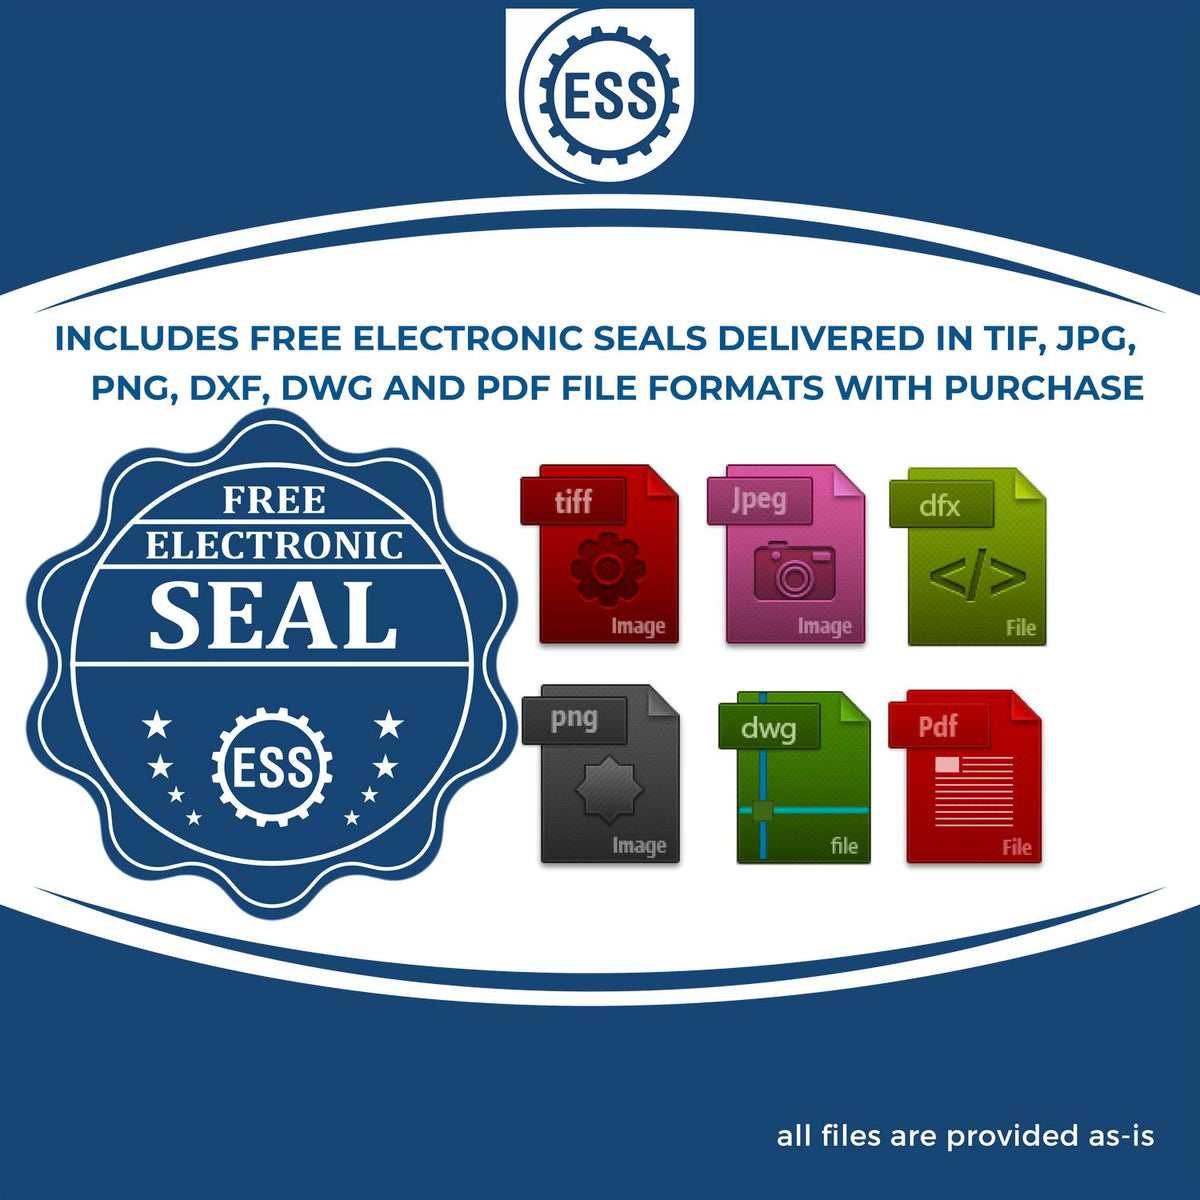 An infographic for the free electronic seal for the Illinois Professional Engineer Seal Stamp illustrating the different file type icons such as DXF, DWG, TIF, JPG and PNG.